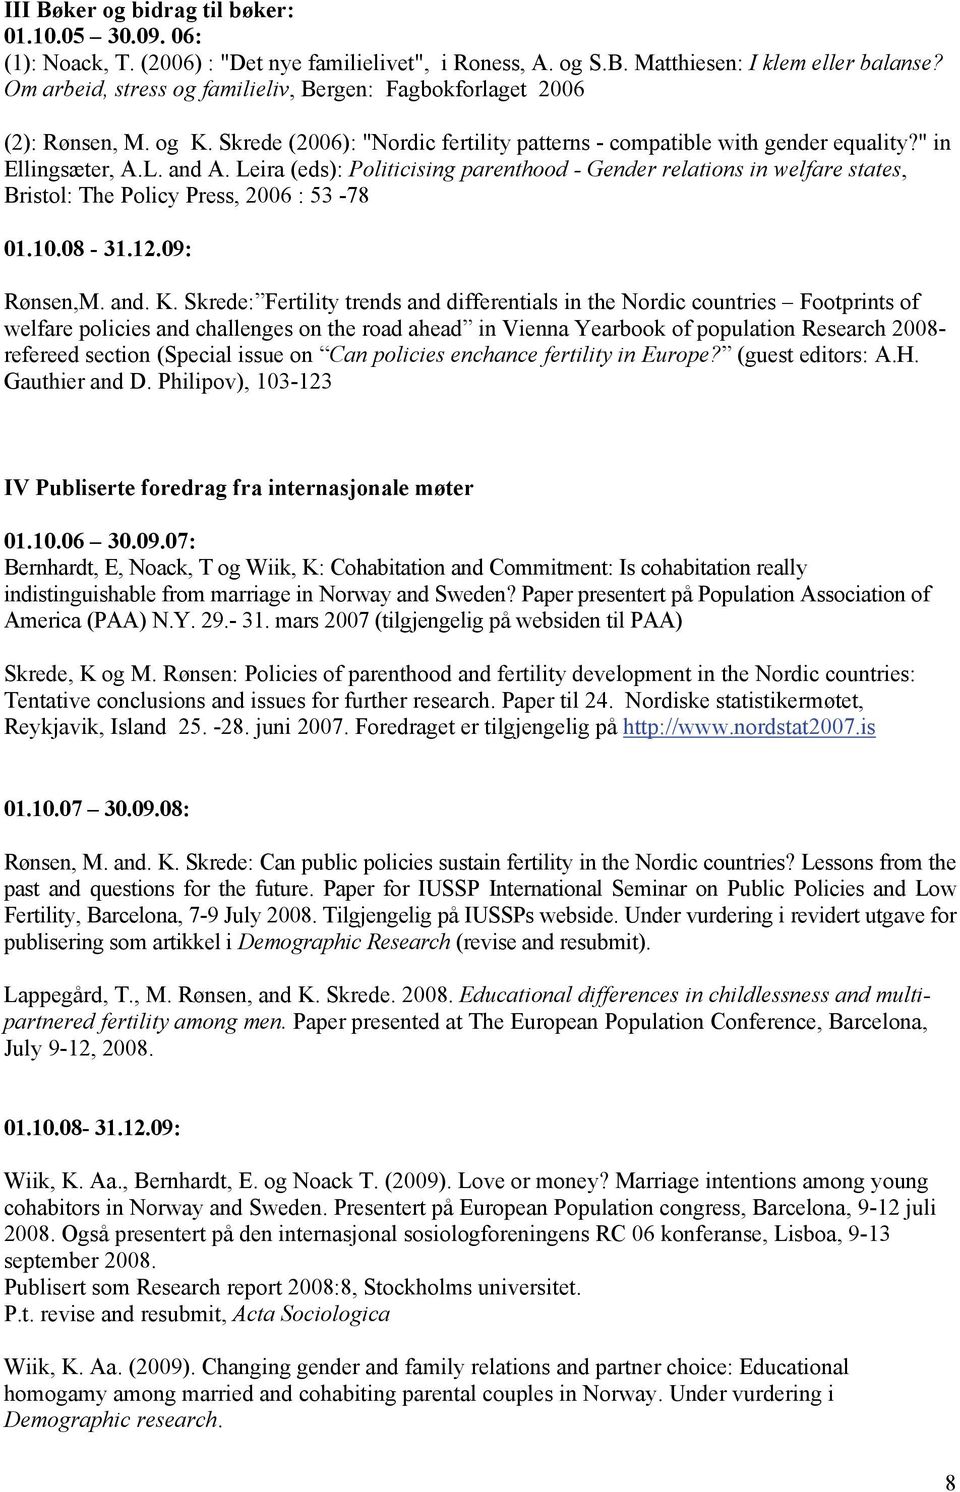 Leira (eds): Politicising parenthood - Gender relations in welfare states, Bristol: The Policy Press, 2006 : 53-78 01.10.08-31.12.09: Rønsen,M. and. K.